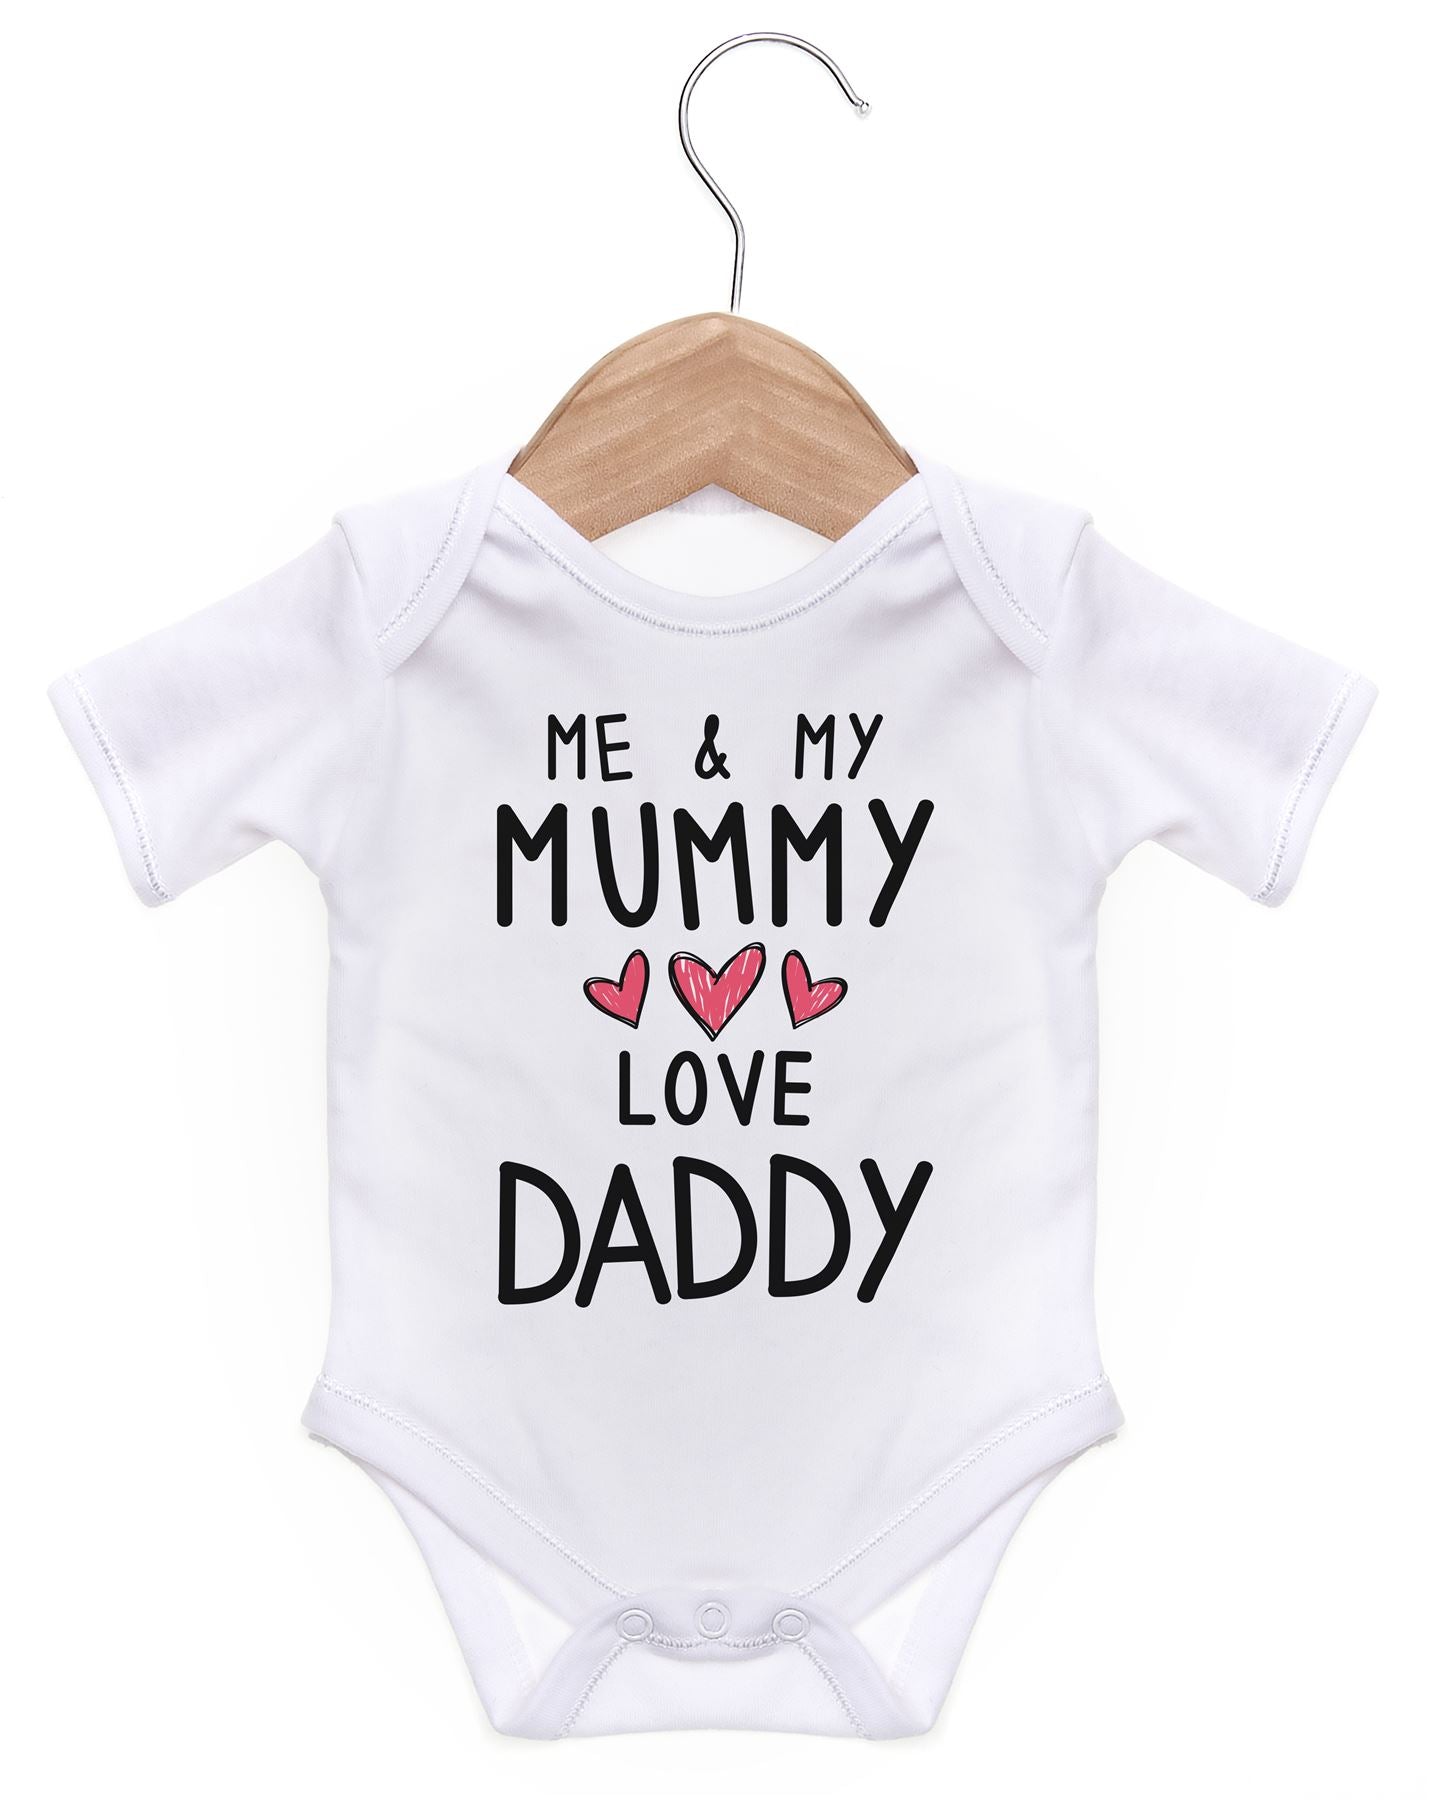 Me And My Mummy Love Daddy Short Sleeve Bodysuit Baby Grow For Baby Baby Hustle